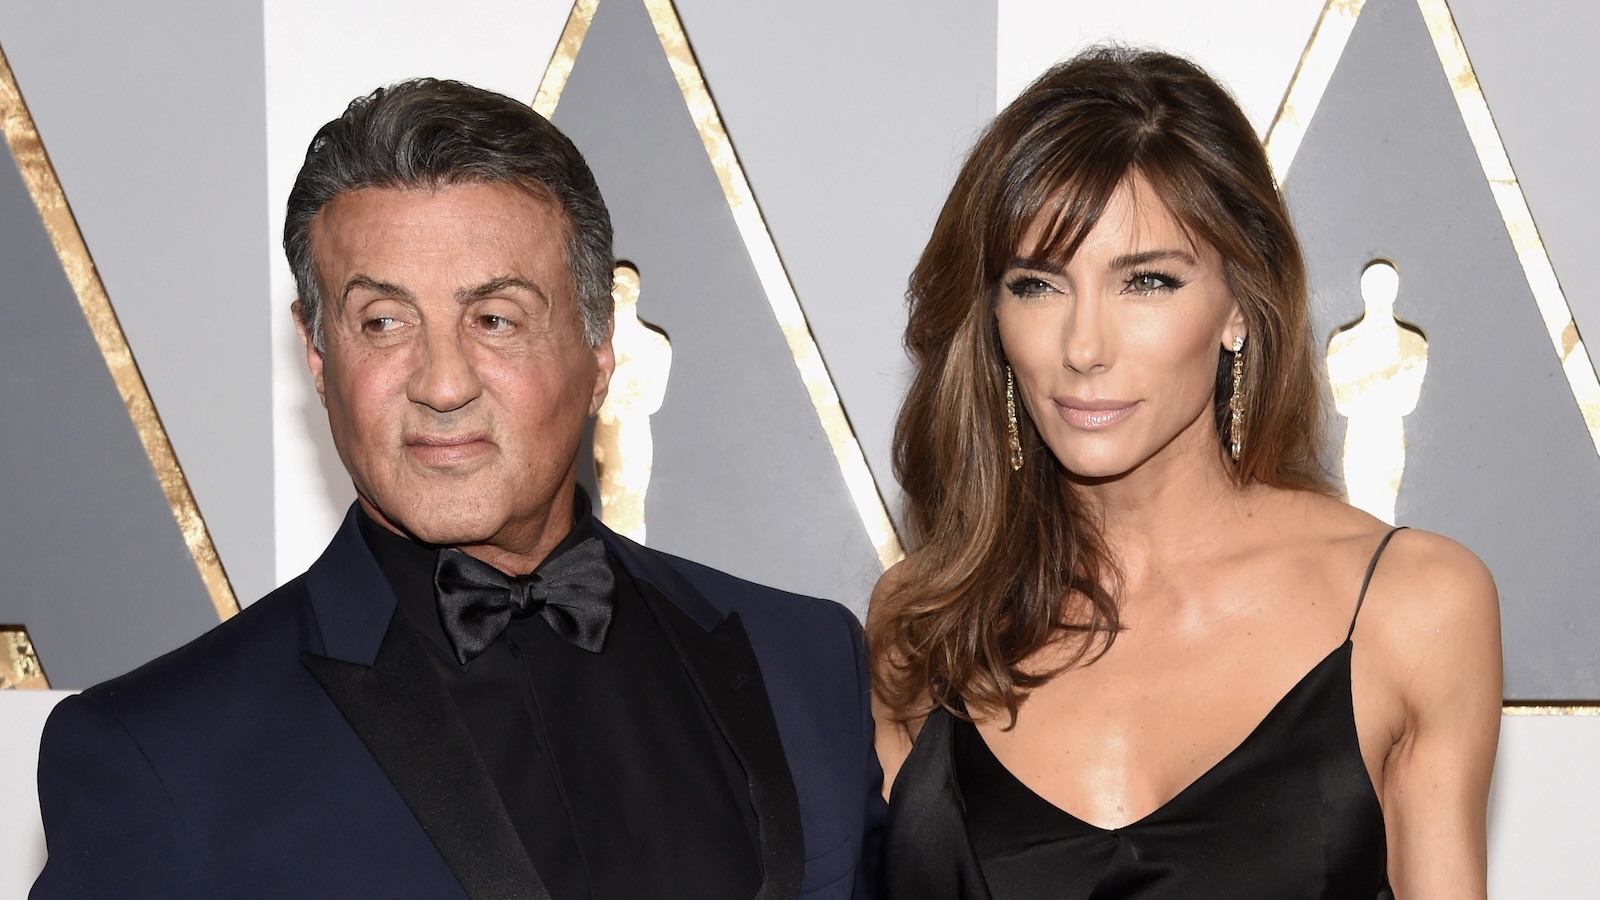 Sylvester Stallone and Jennifer Flavin attend the 88th Annual Academy Awards at Hollywood & Highland Center on February 28, 2016 in Hollywood, California.